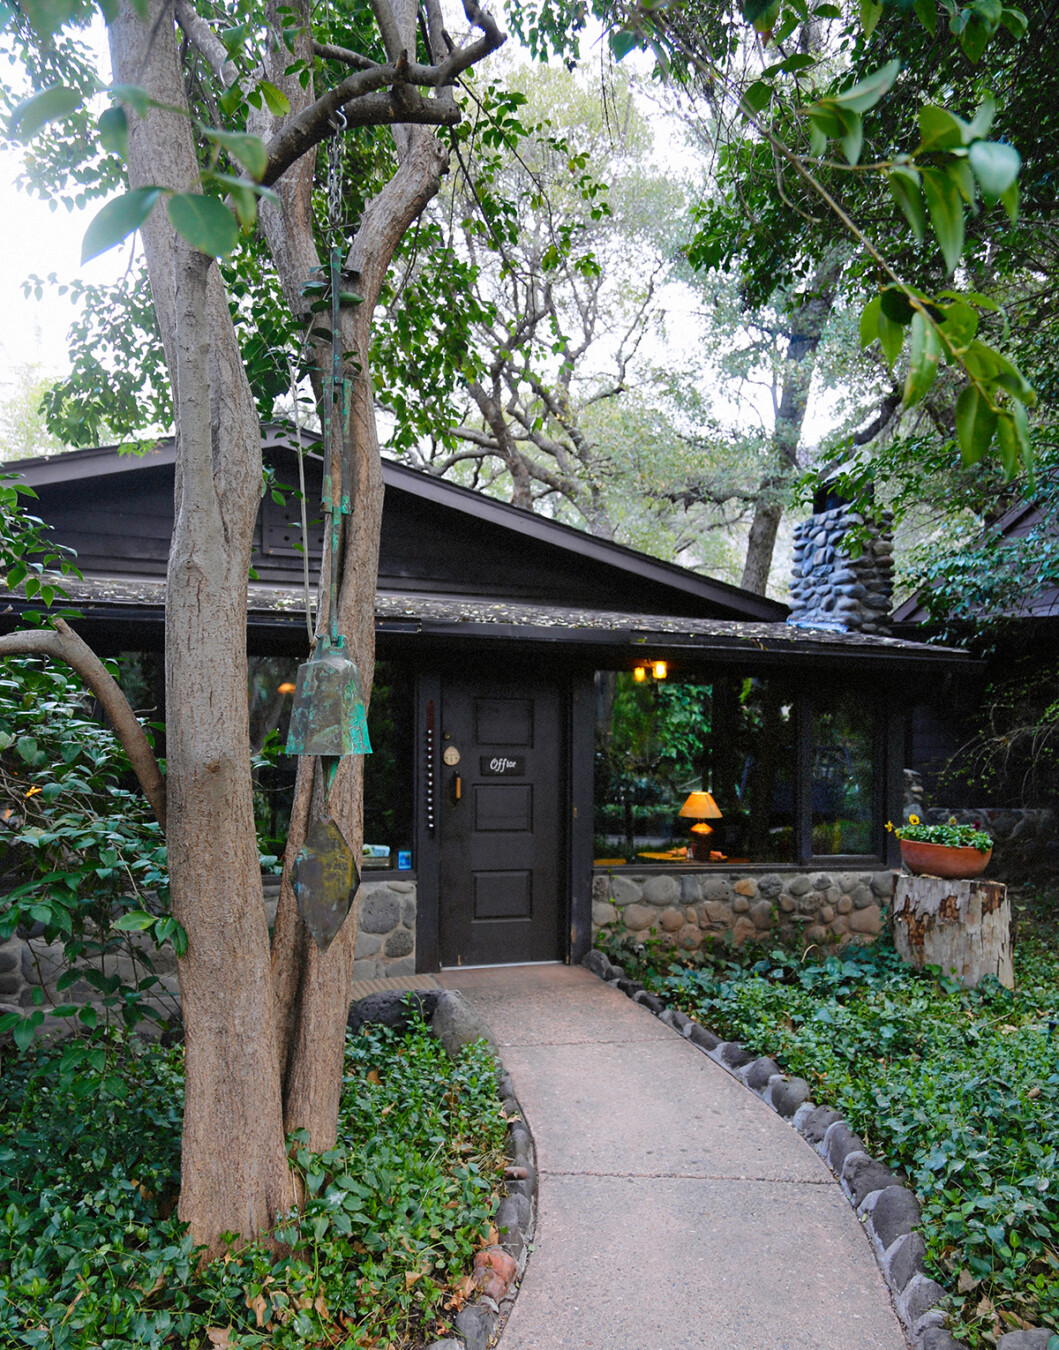 Exterior view of the lobby entrance at the Briar Patch Inn in Sedona, Arizona.